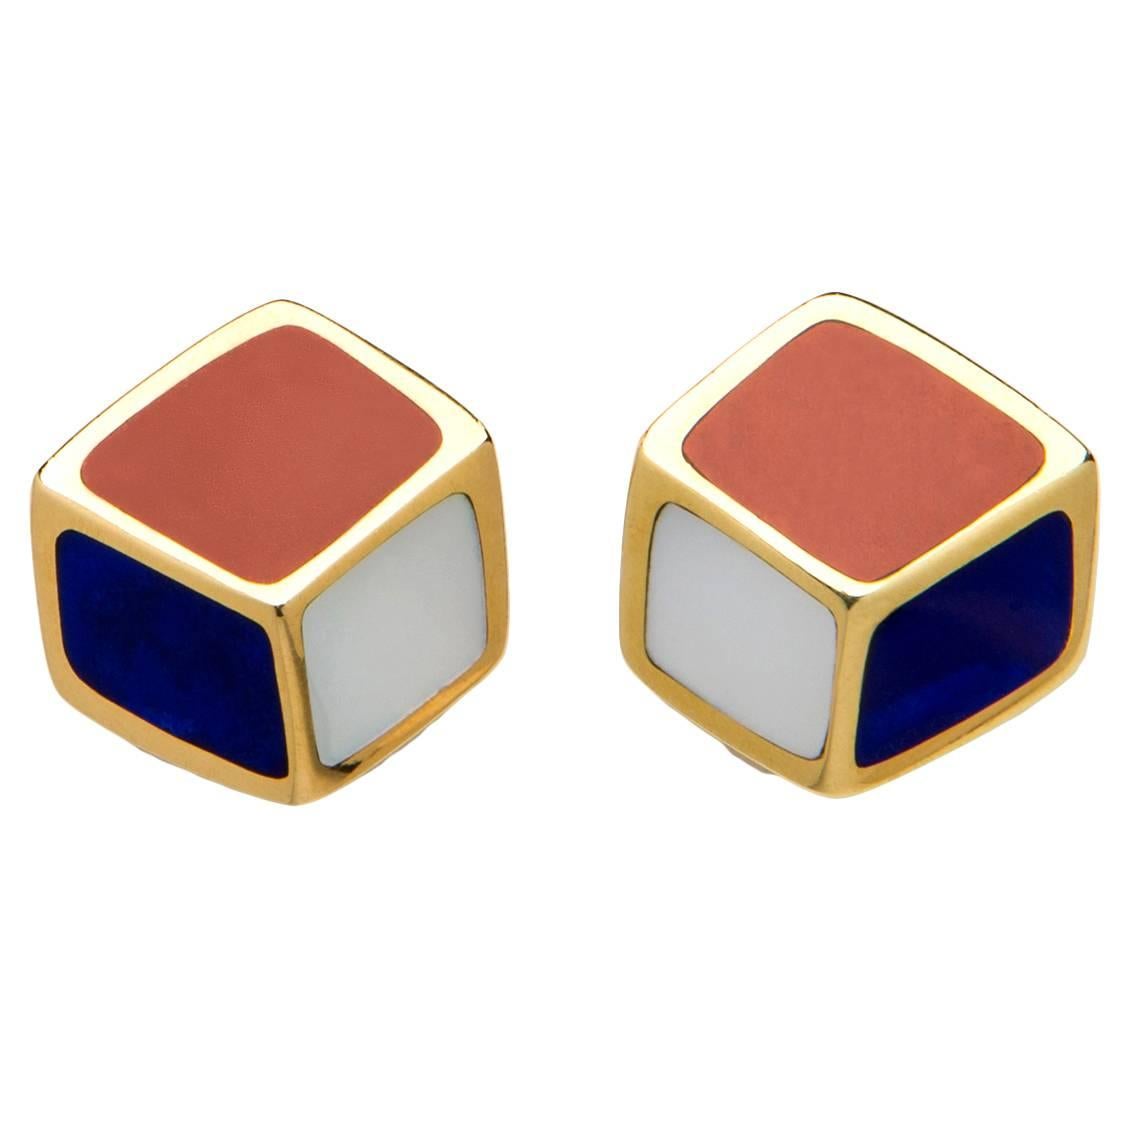 Lapis, Carnelian and Mother of Pearl are a striking combination in this simple geometric design created by Tiffany & Co.  7/8's of an inch in size

